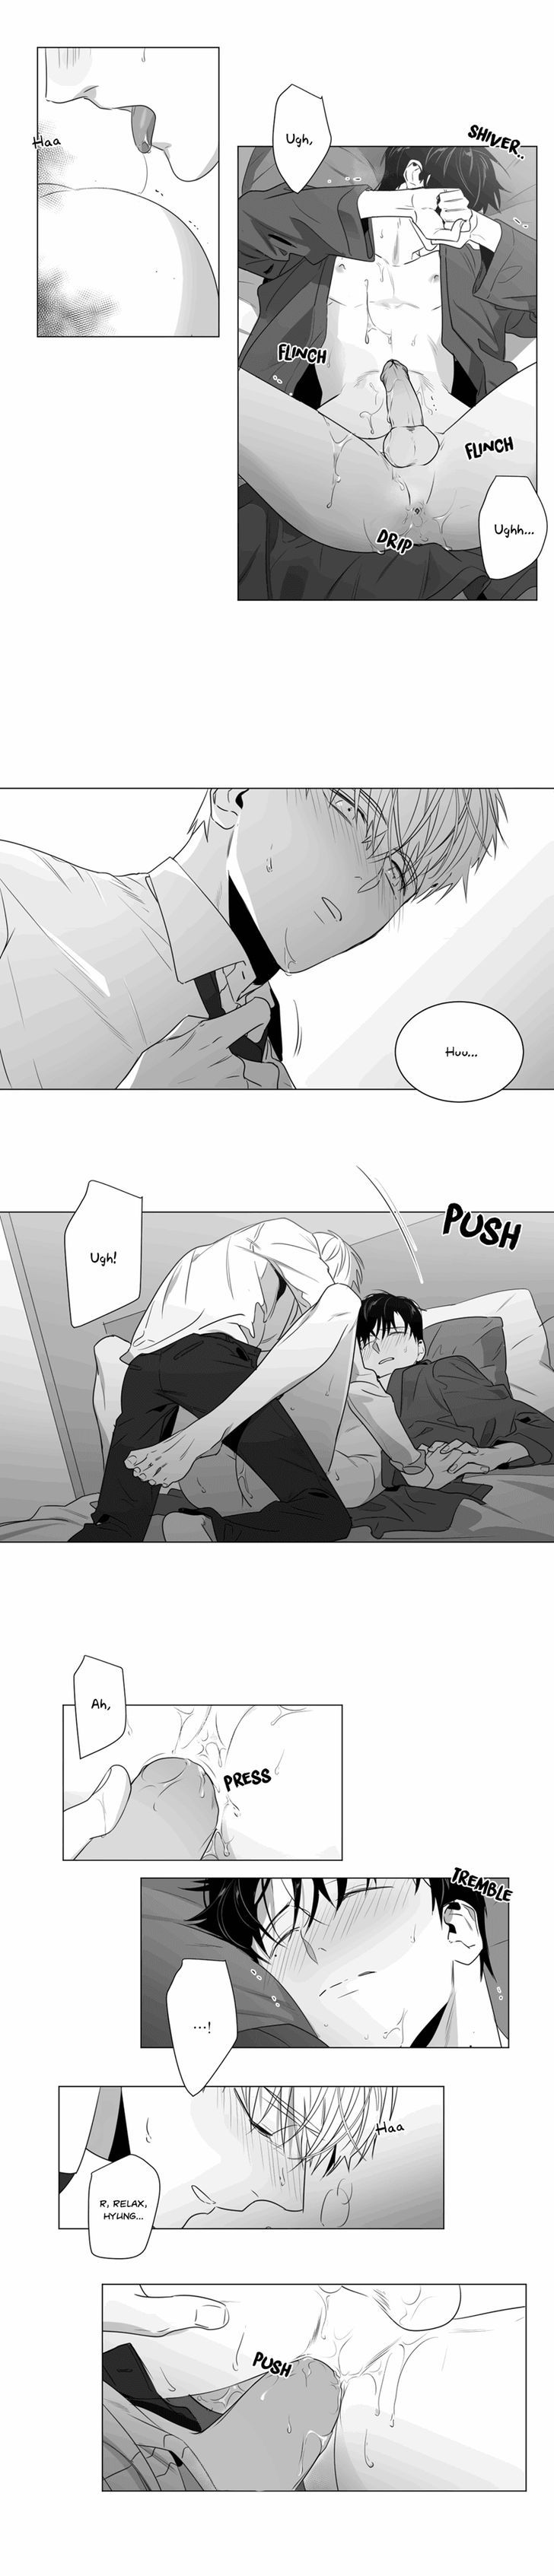 Lover Boy (Lezhin) Chapter 034 page 10